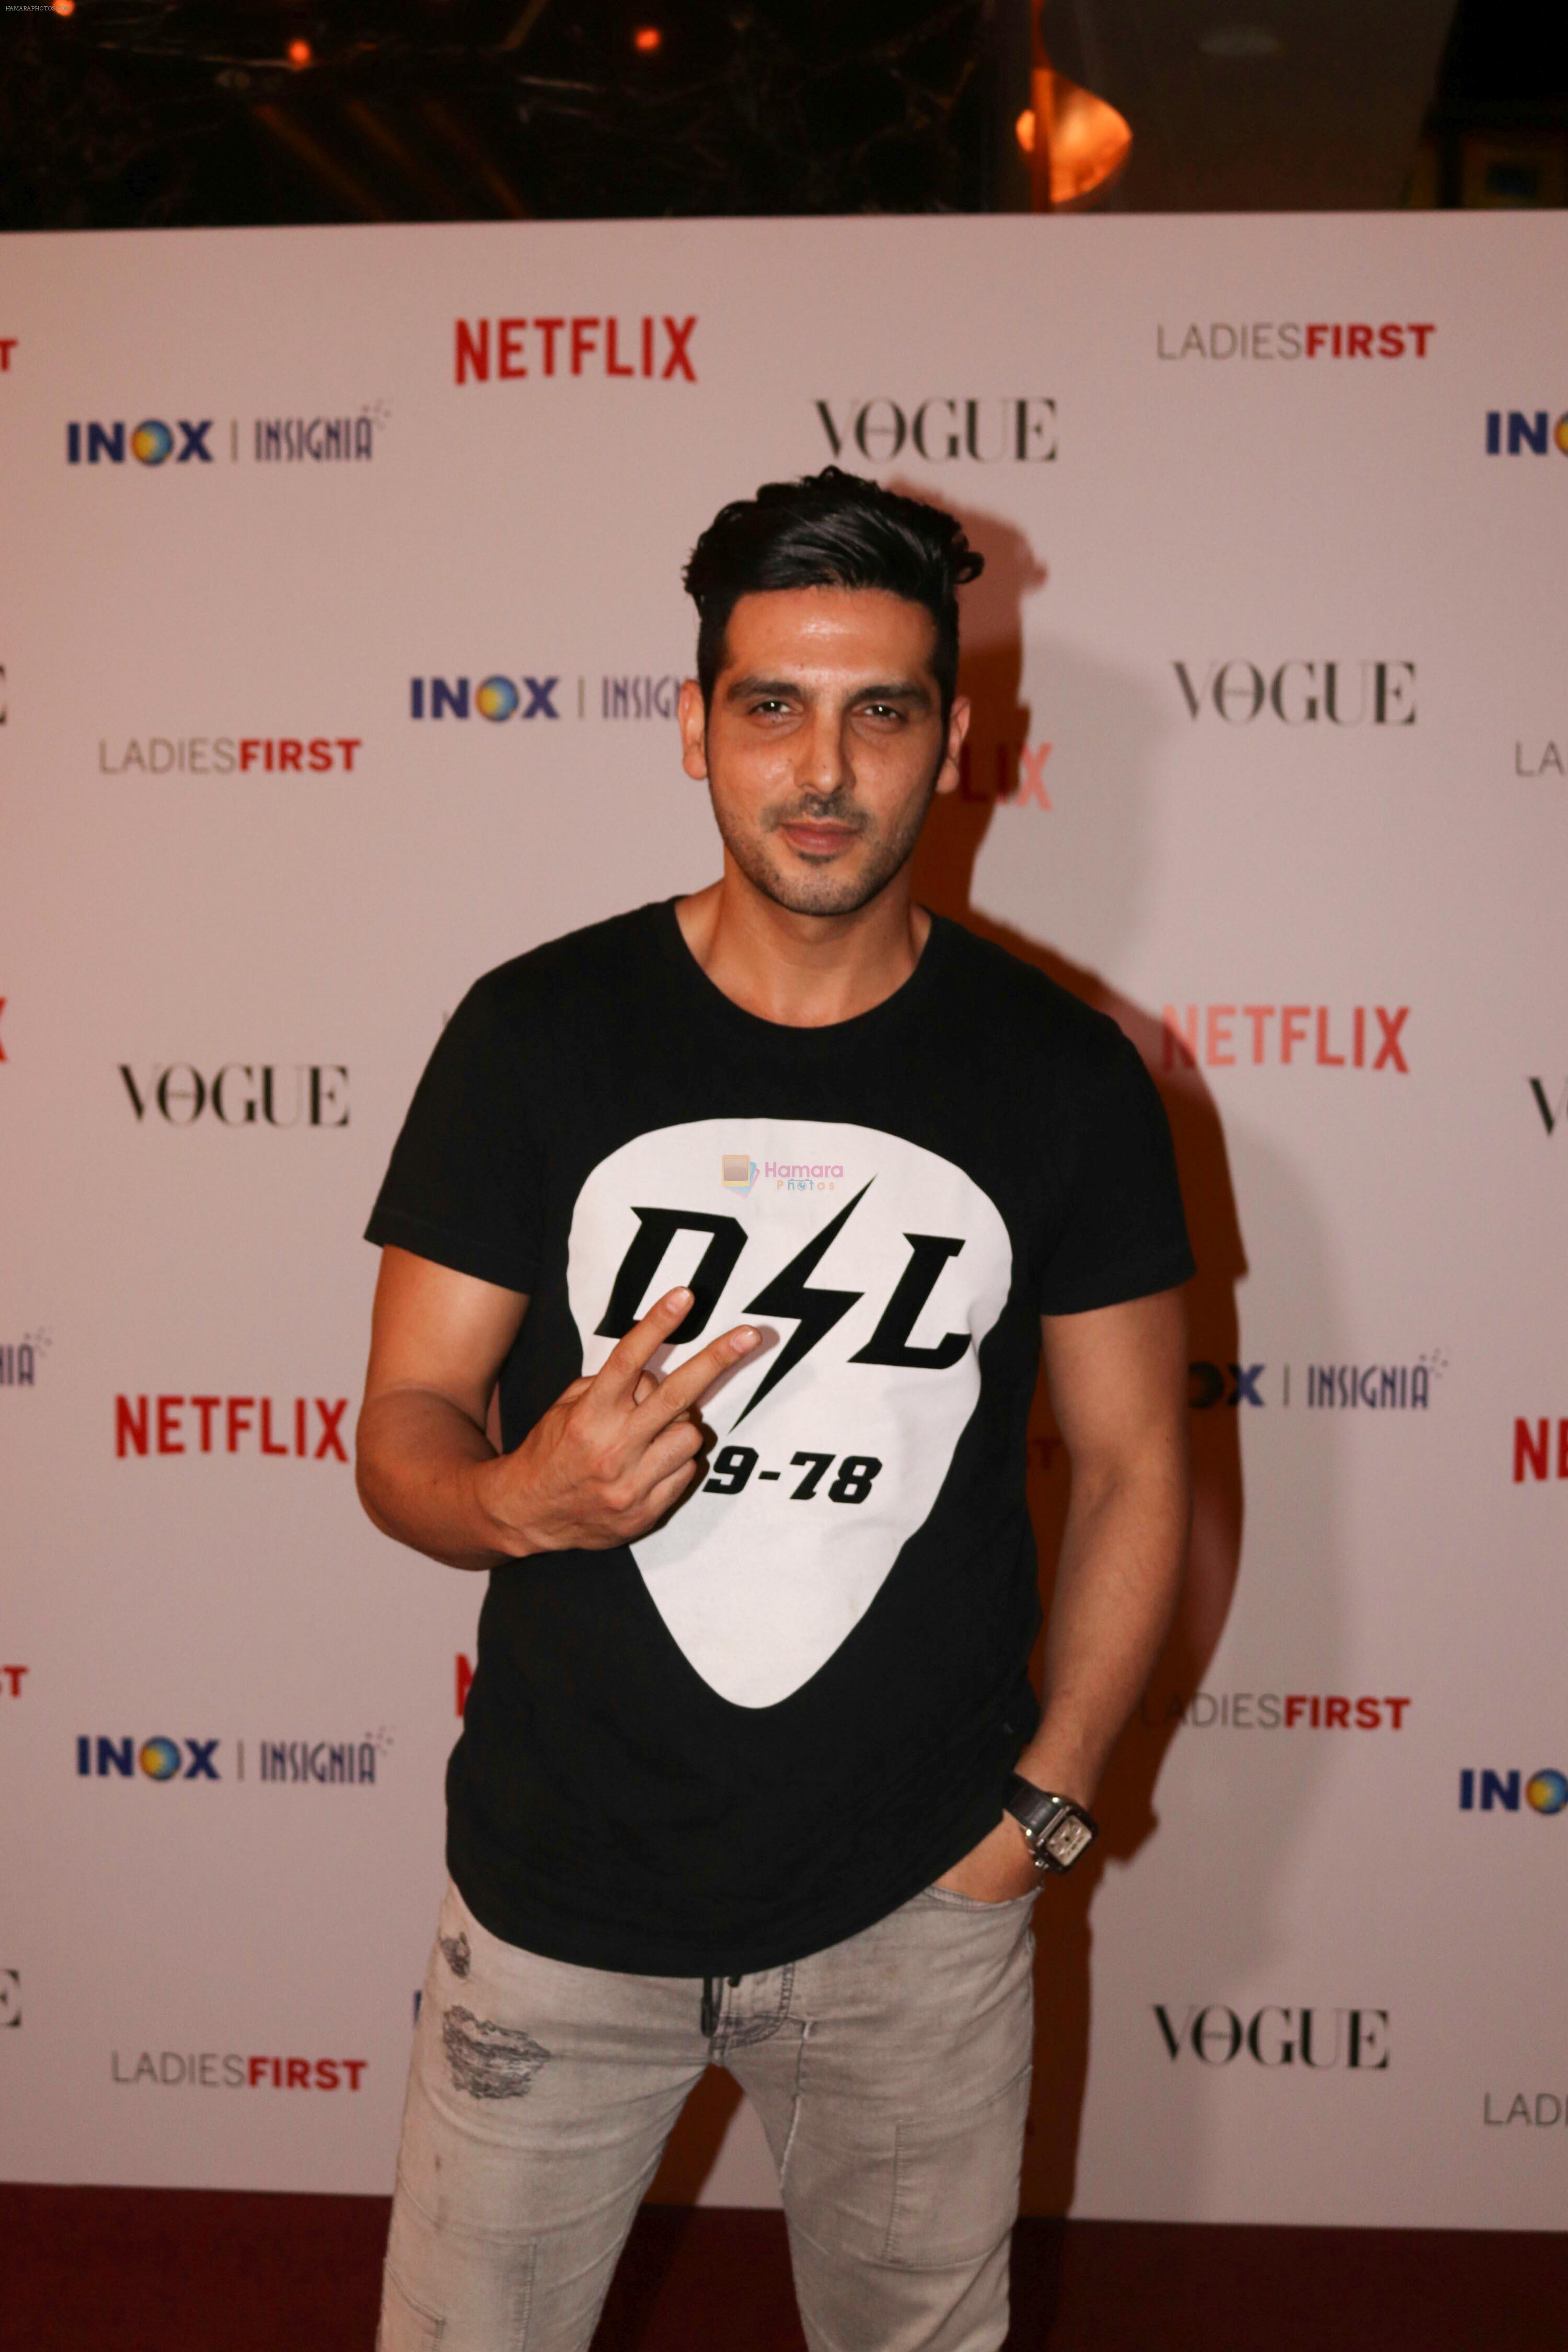 Zayed Khan at the Premier of _Ladies First_- The First Original Netflix Documentary that chronicles the life of World No 1 Archer, Deepika Kumari on 8th March 2018